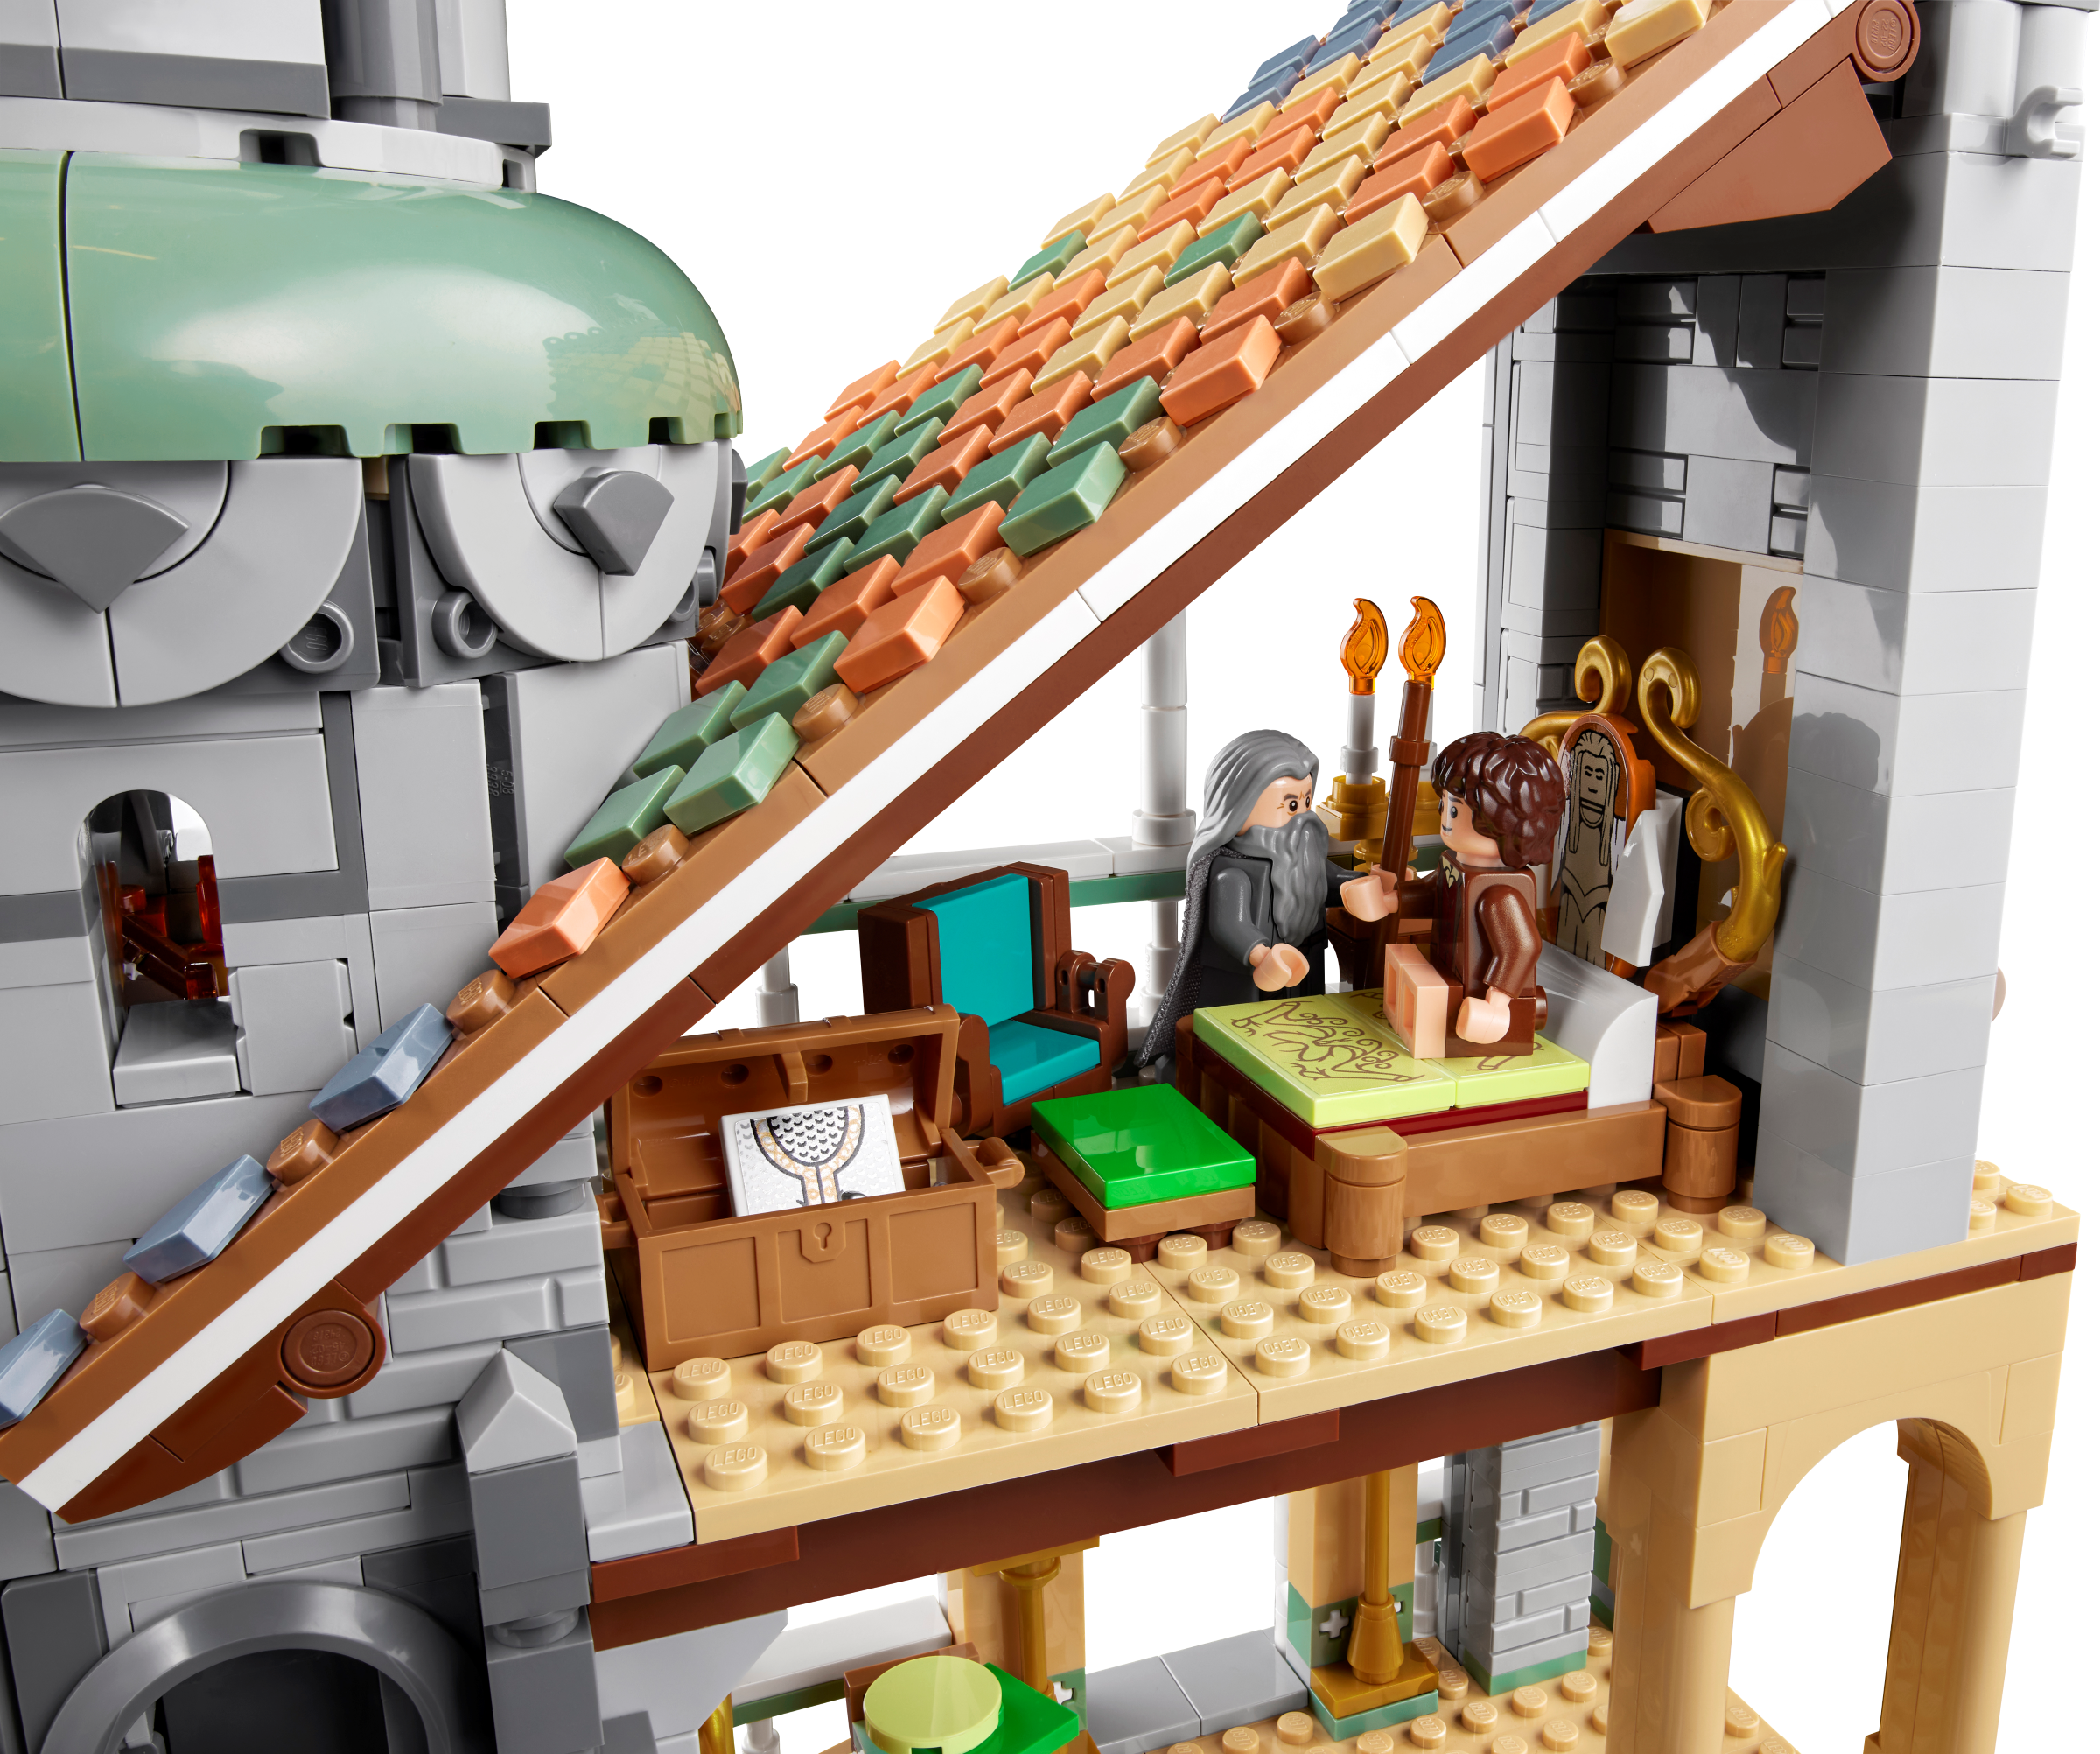 LEGO Icons 10316 The Lord of the Rings Rivendell : l'annonce